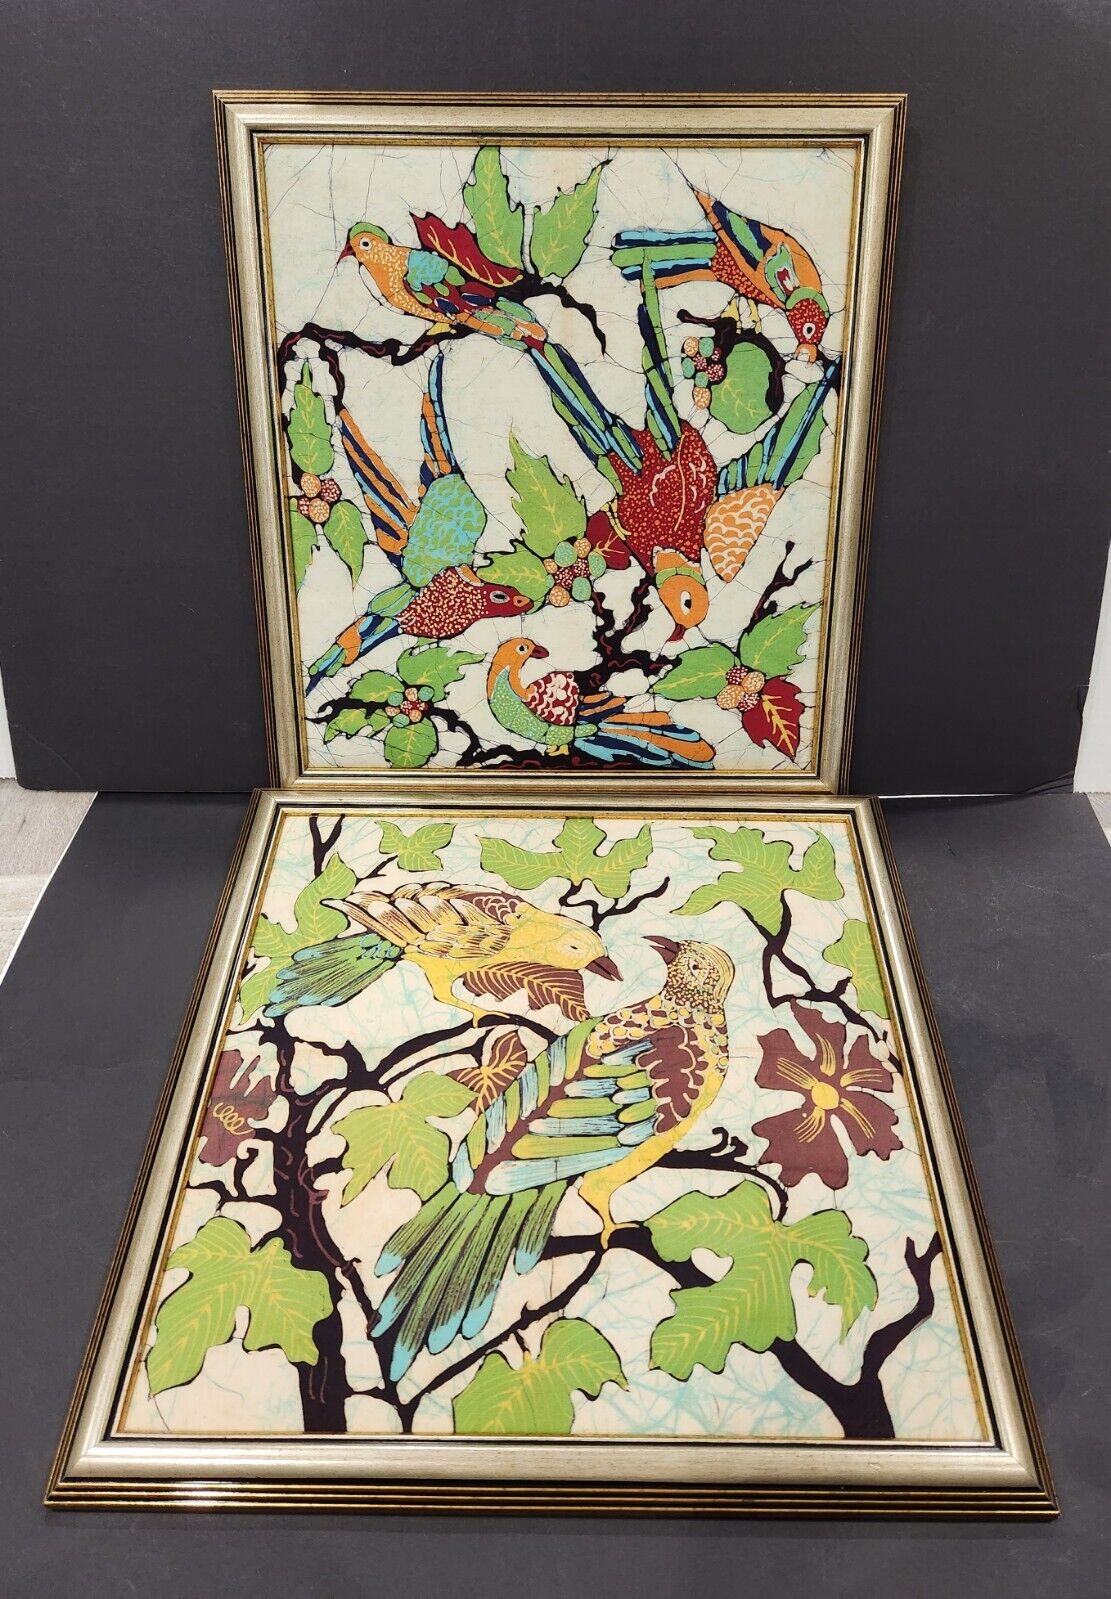 (2) VTG Framed Asian Chinese (?) Fabric Bird Art Prints - Stained Glass Pattern